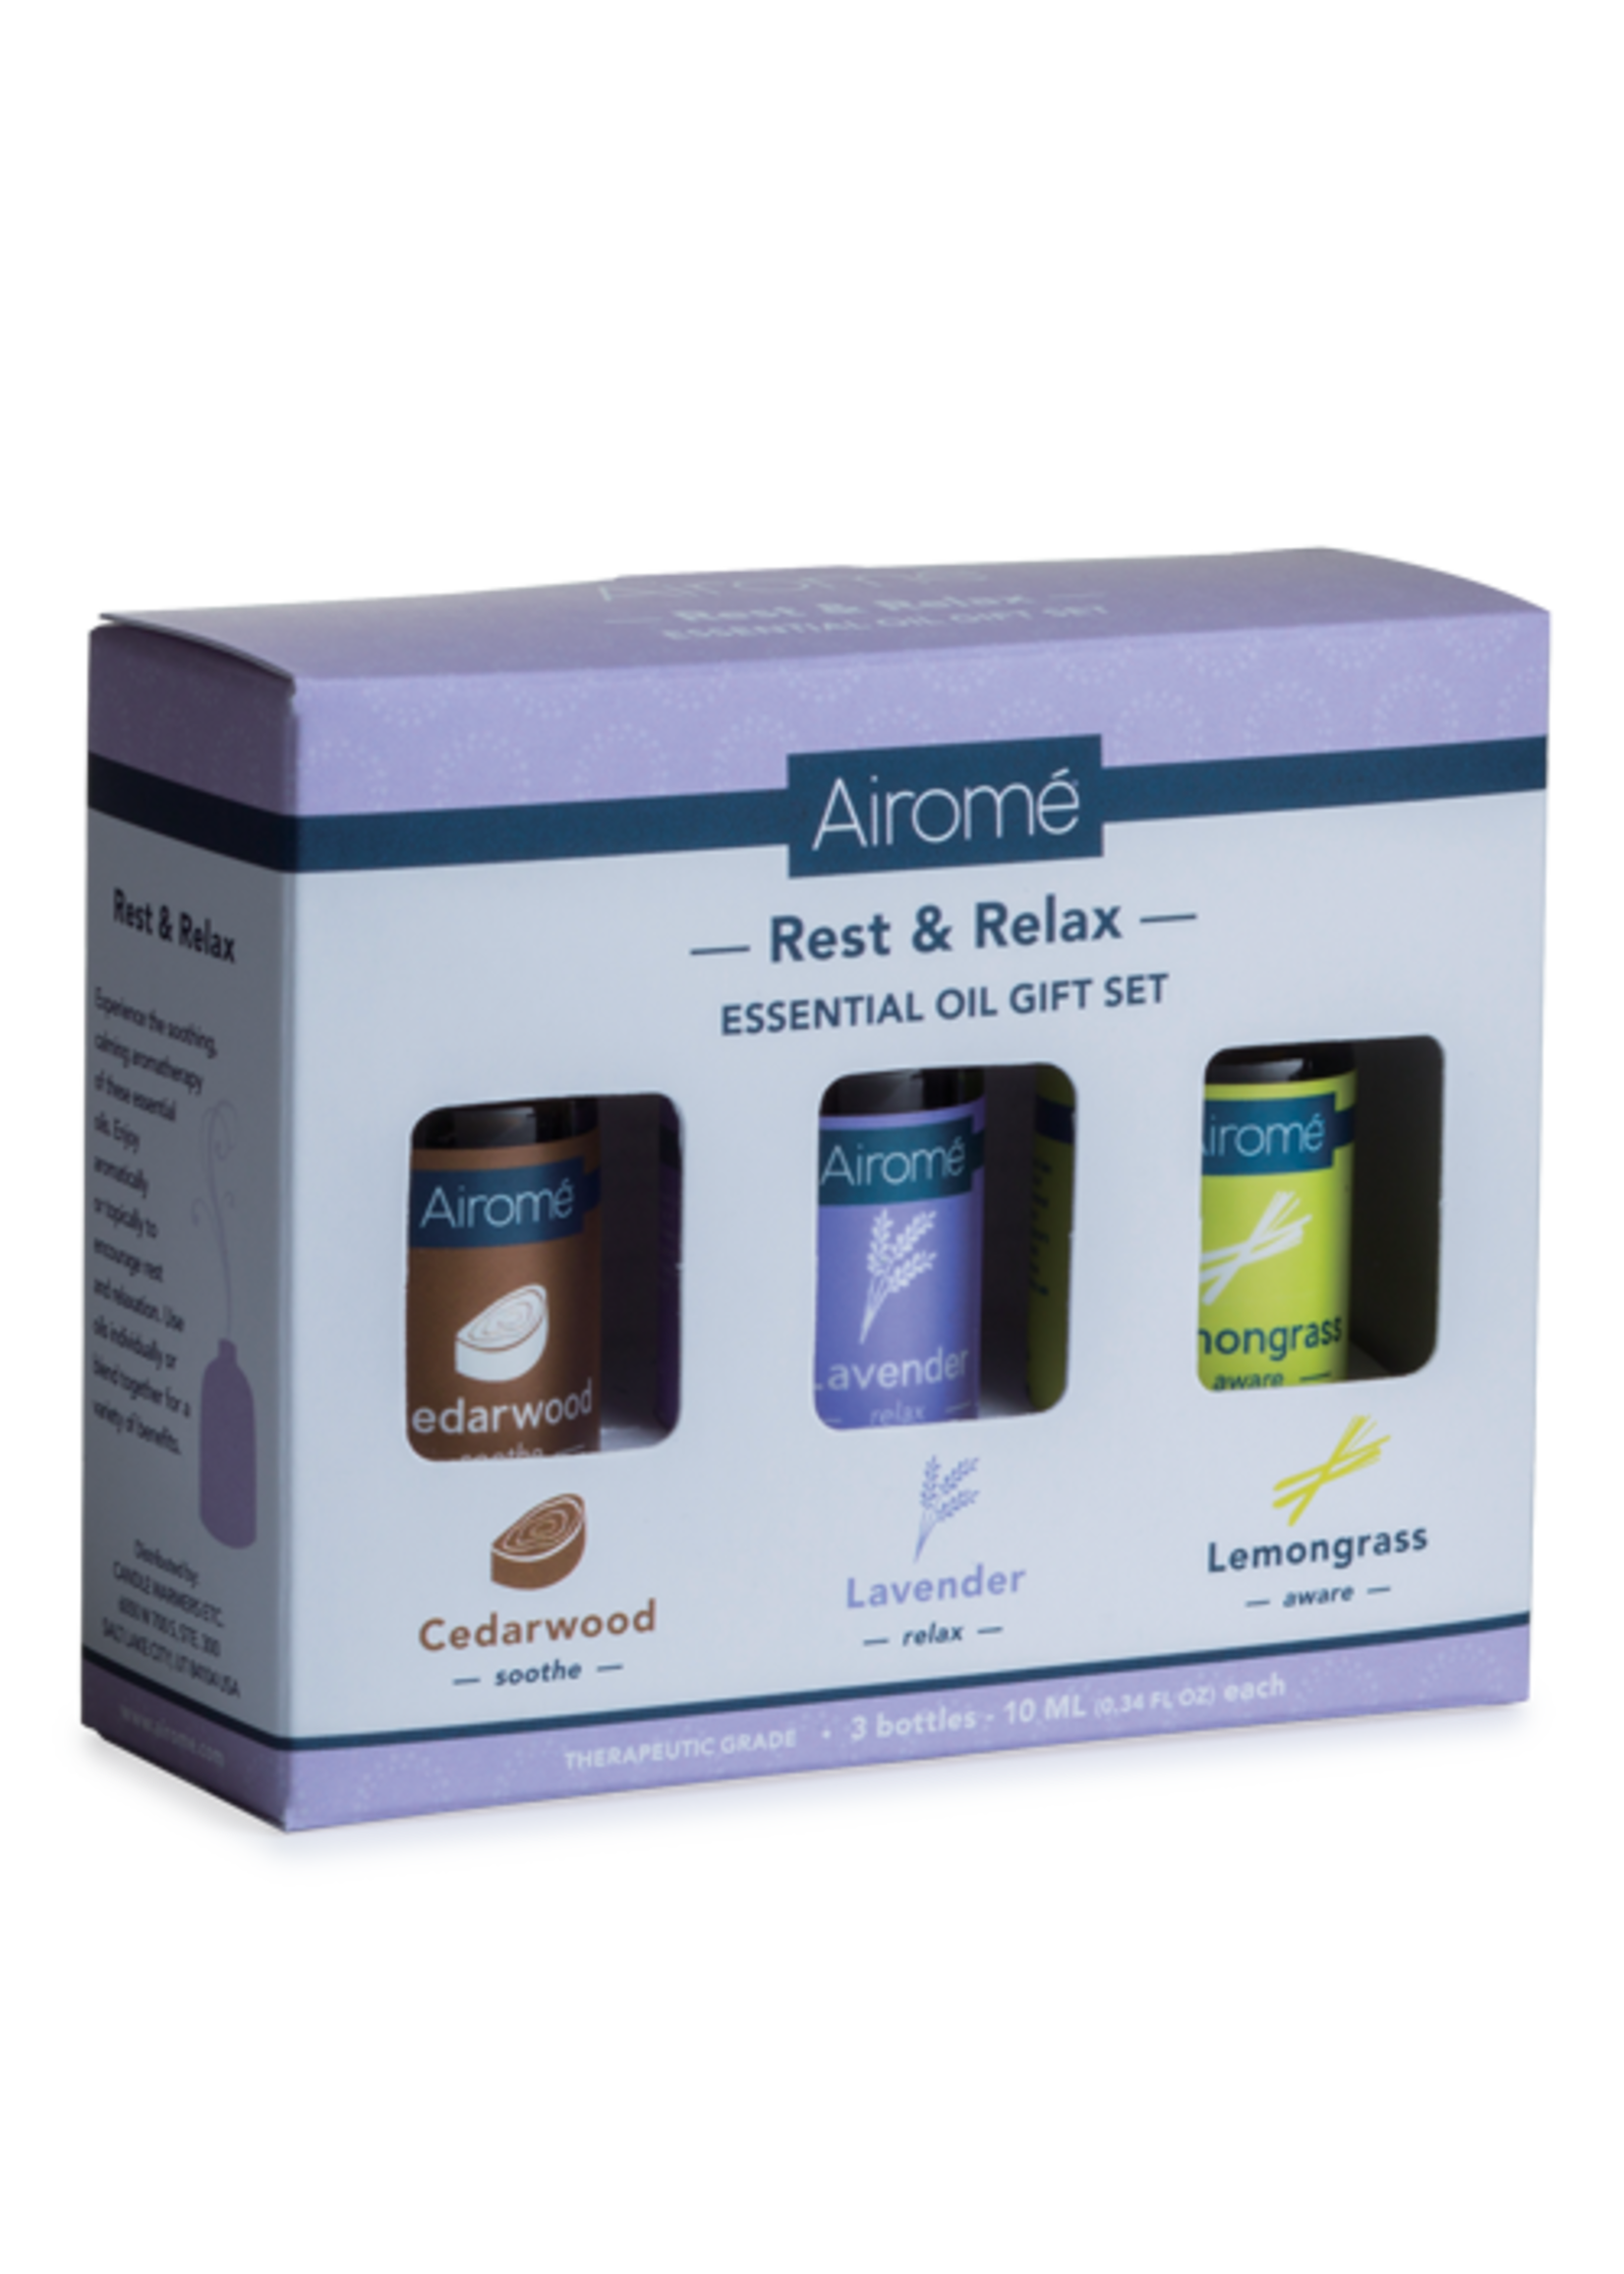 Airome Rest & Relax Essential Oli Gift Set